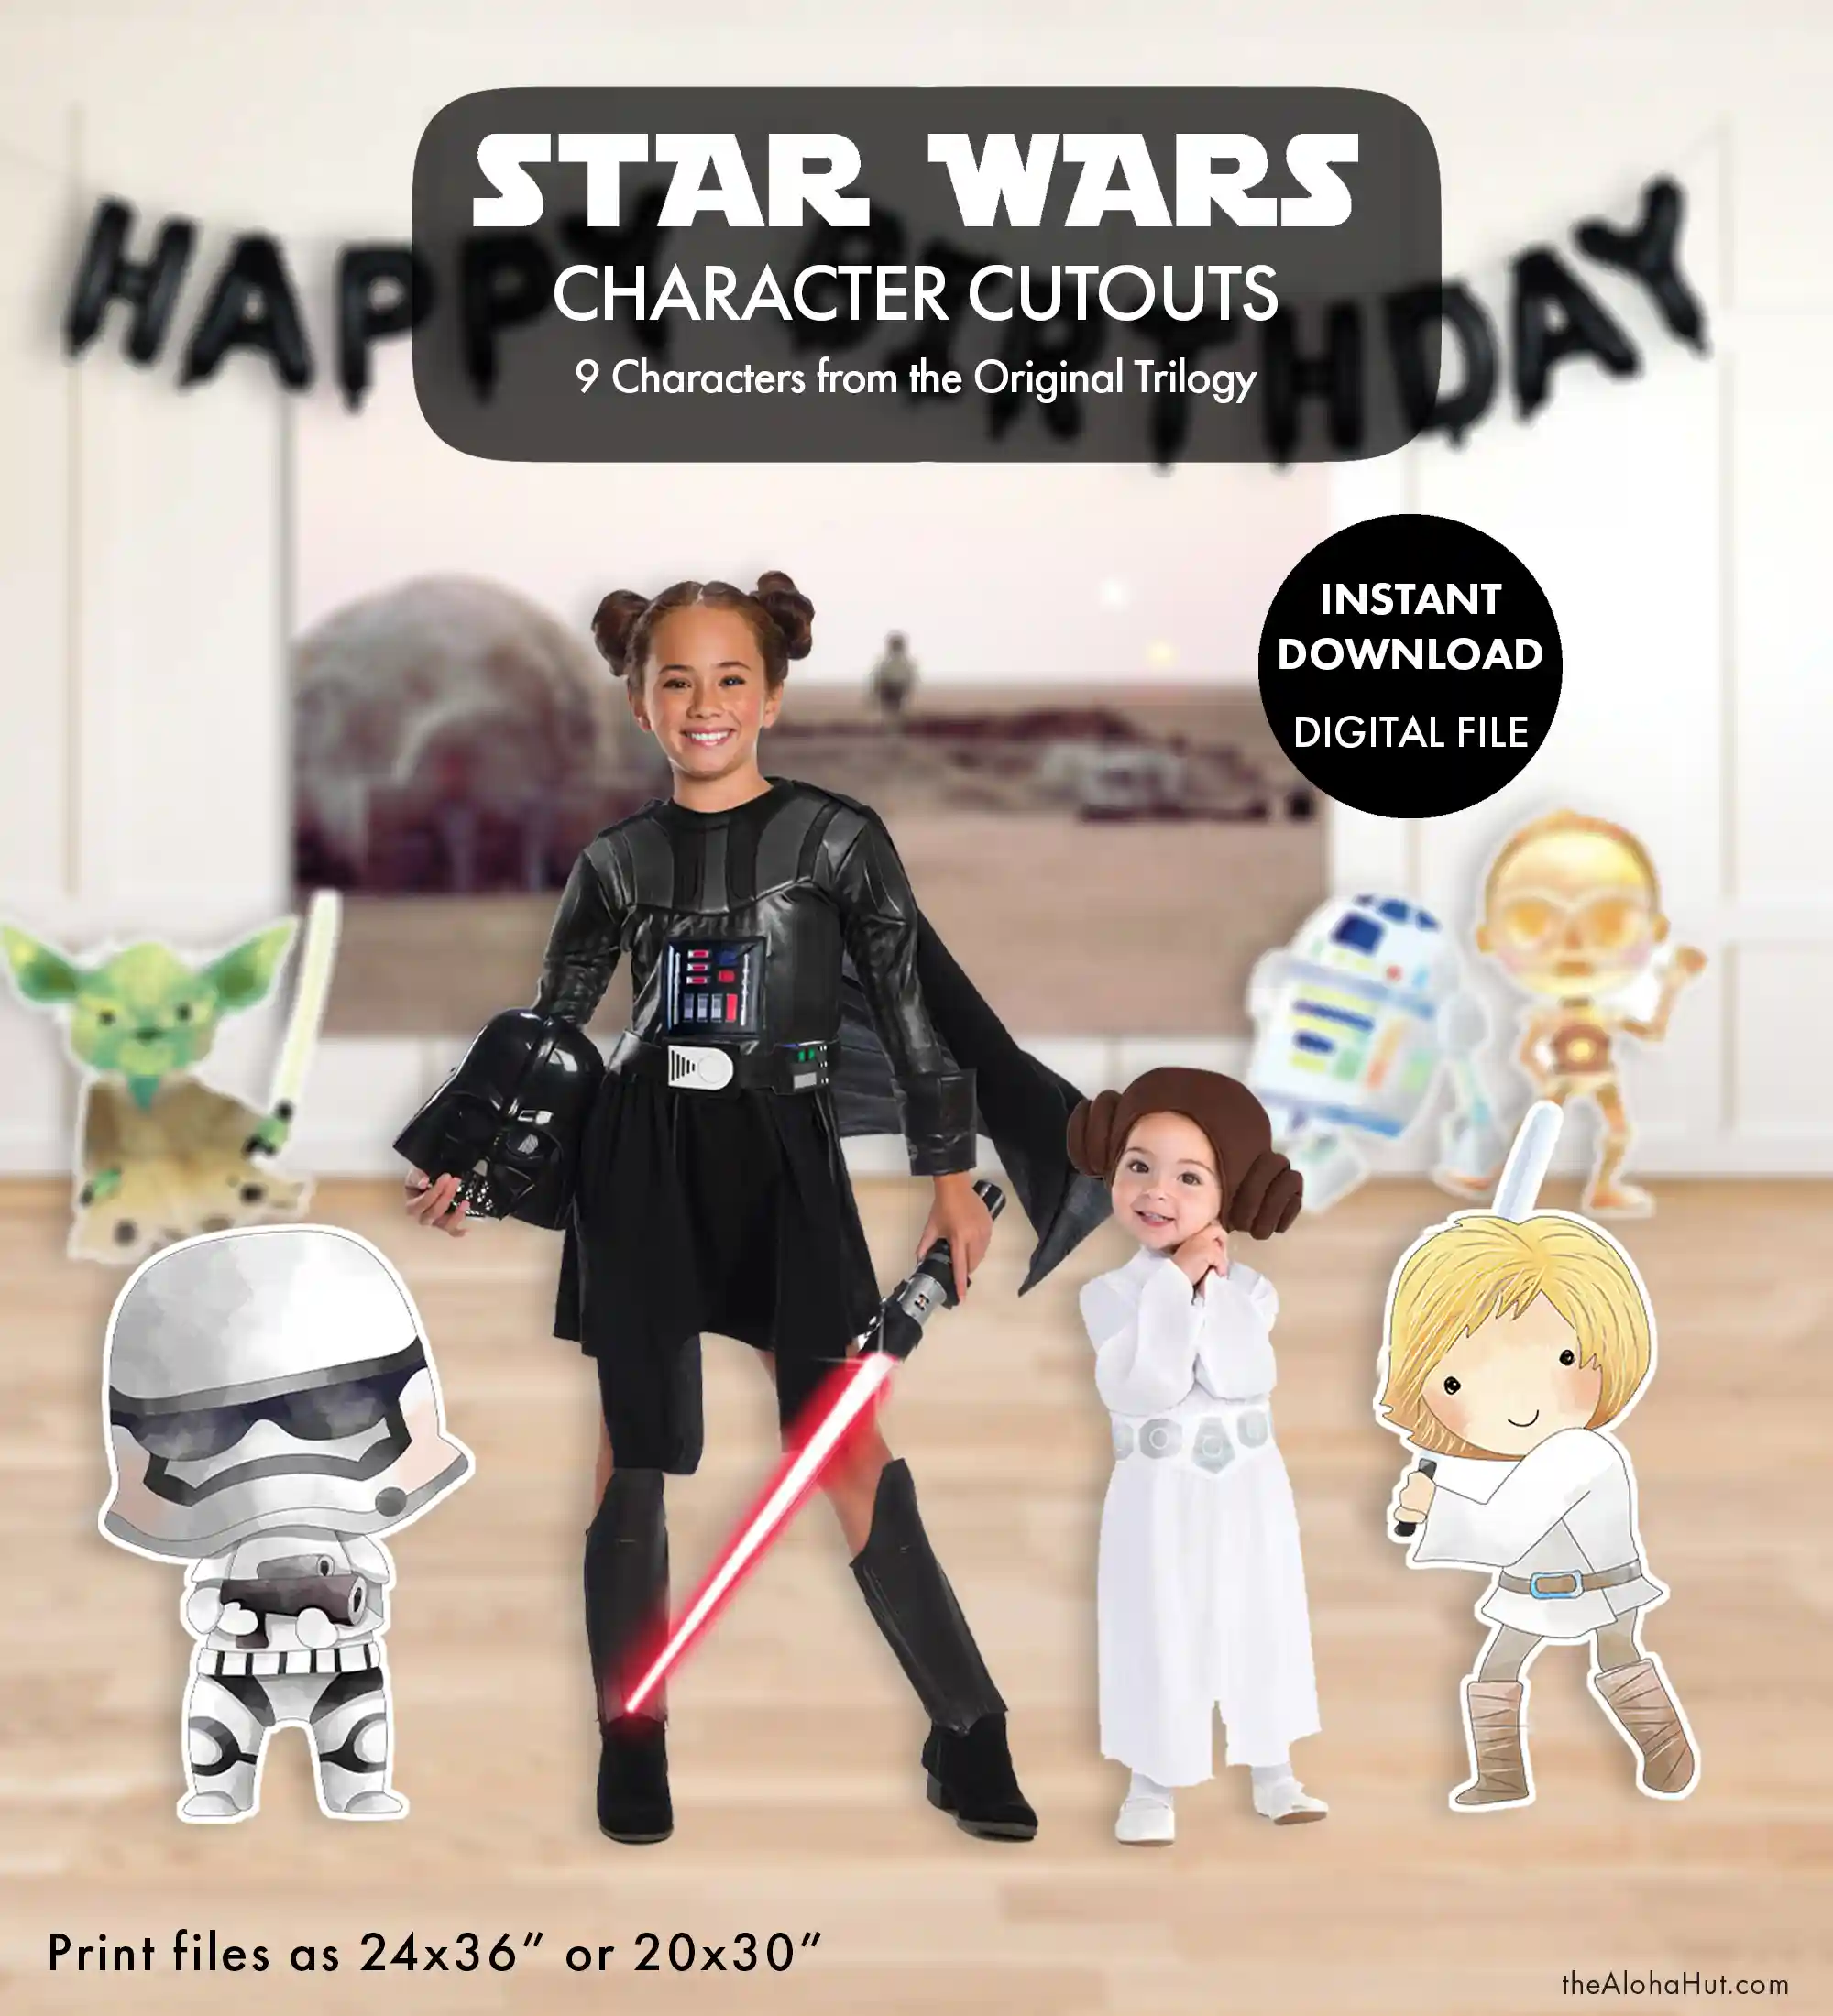 Star Wars party ideas, activities, birthday party games, decorations, and prints. Ideas and tips and tricks for throwing the best Star Wars themed kids birthday party, baby shower, or one with the force celebration. Includes Star Wars printable games, decorations (cupcake toppers, banners, gift tags, characters) and Star Wars party games (BINGO, scavenger hunt, pin the lightsaber on Yoda or Darth Vader). Character cutouts include Princess Leia, Darth Vader, Han Solo, Luke Skywalker, Chewbacca, Yoda, R2-D2, C-3PO, Storm Trooper.